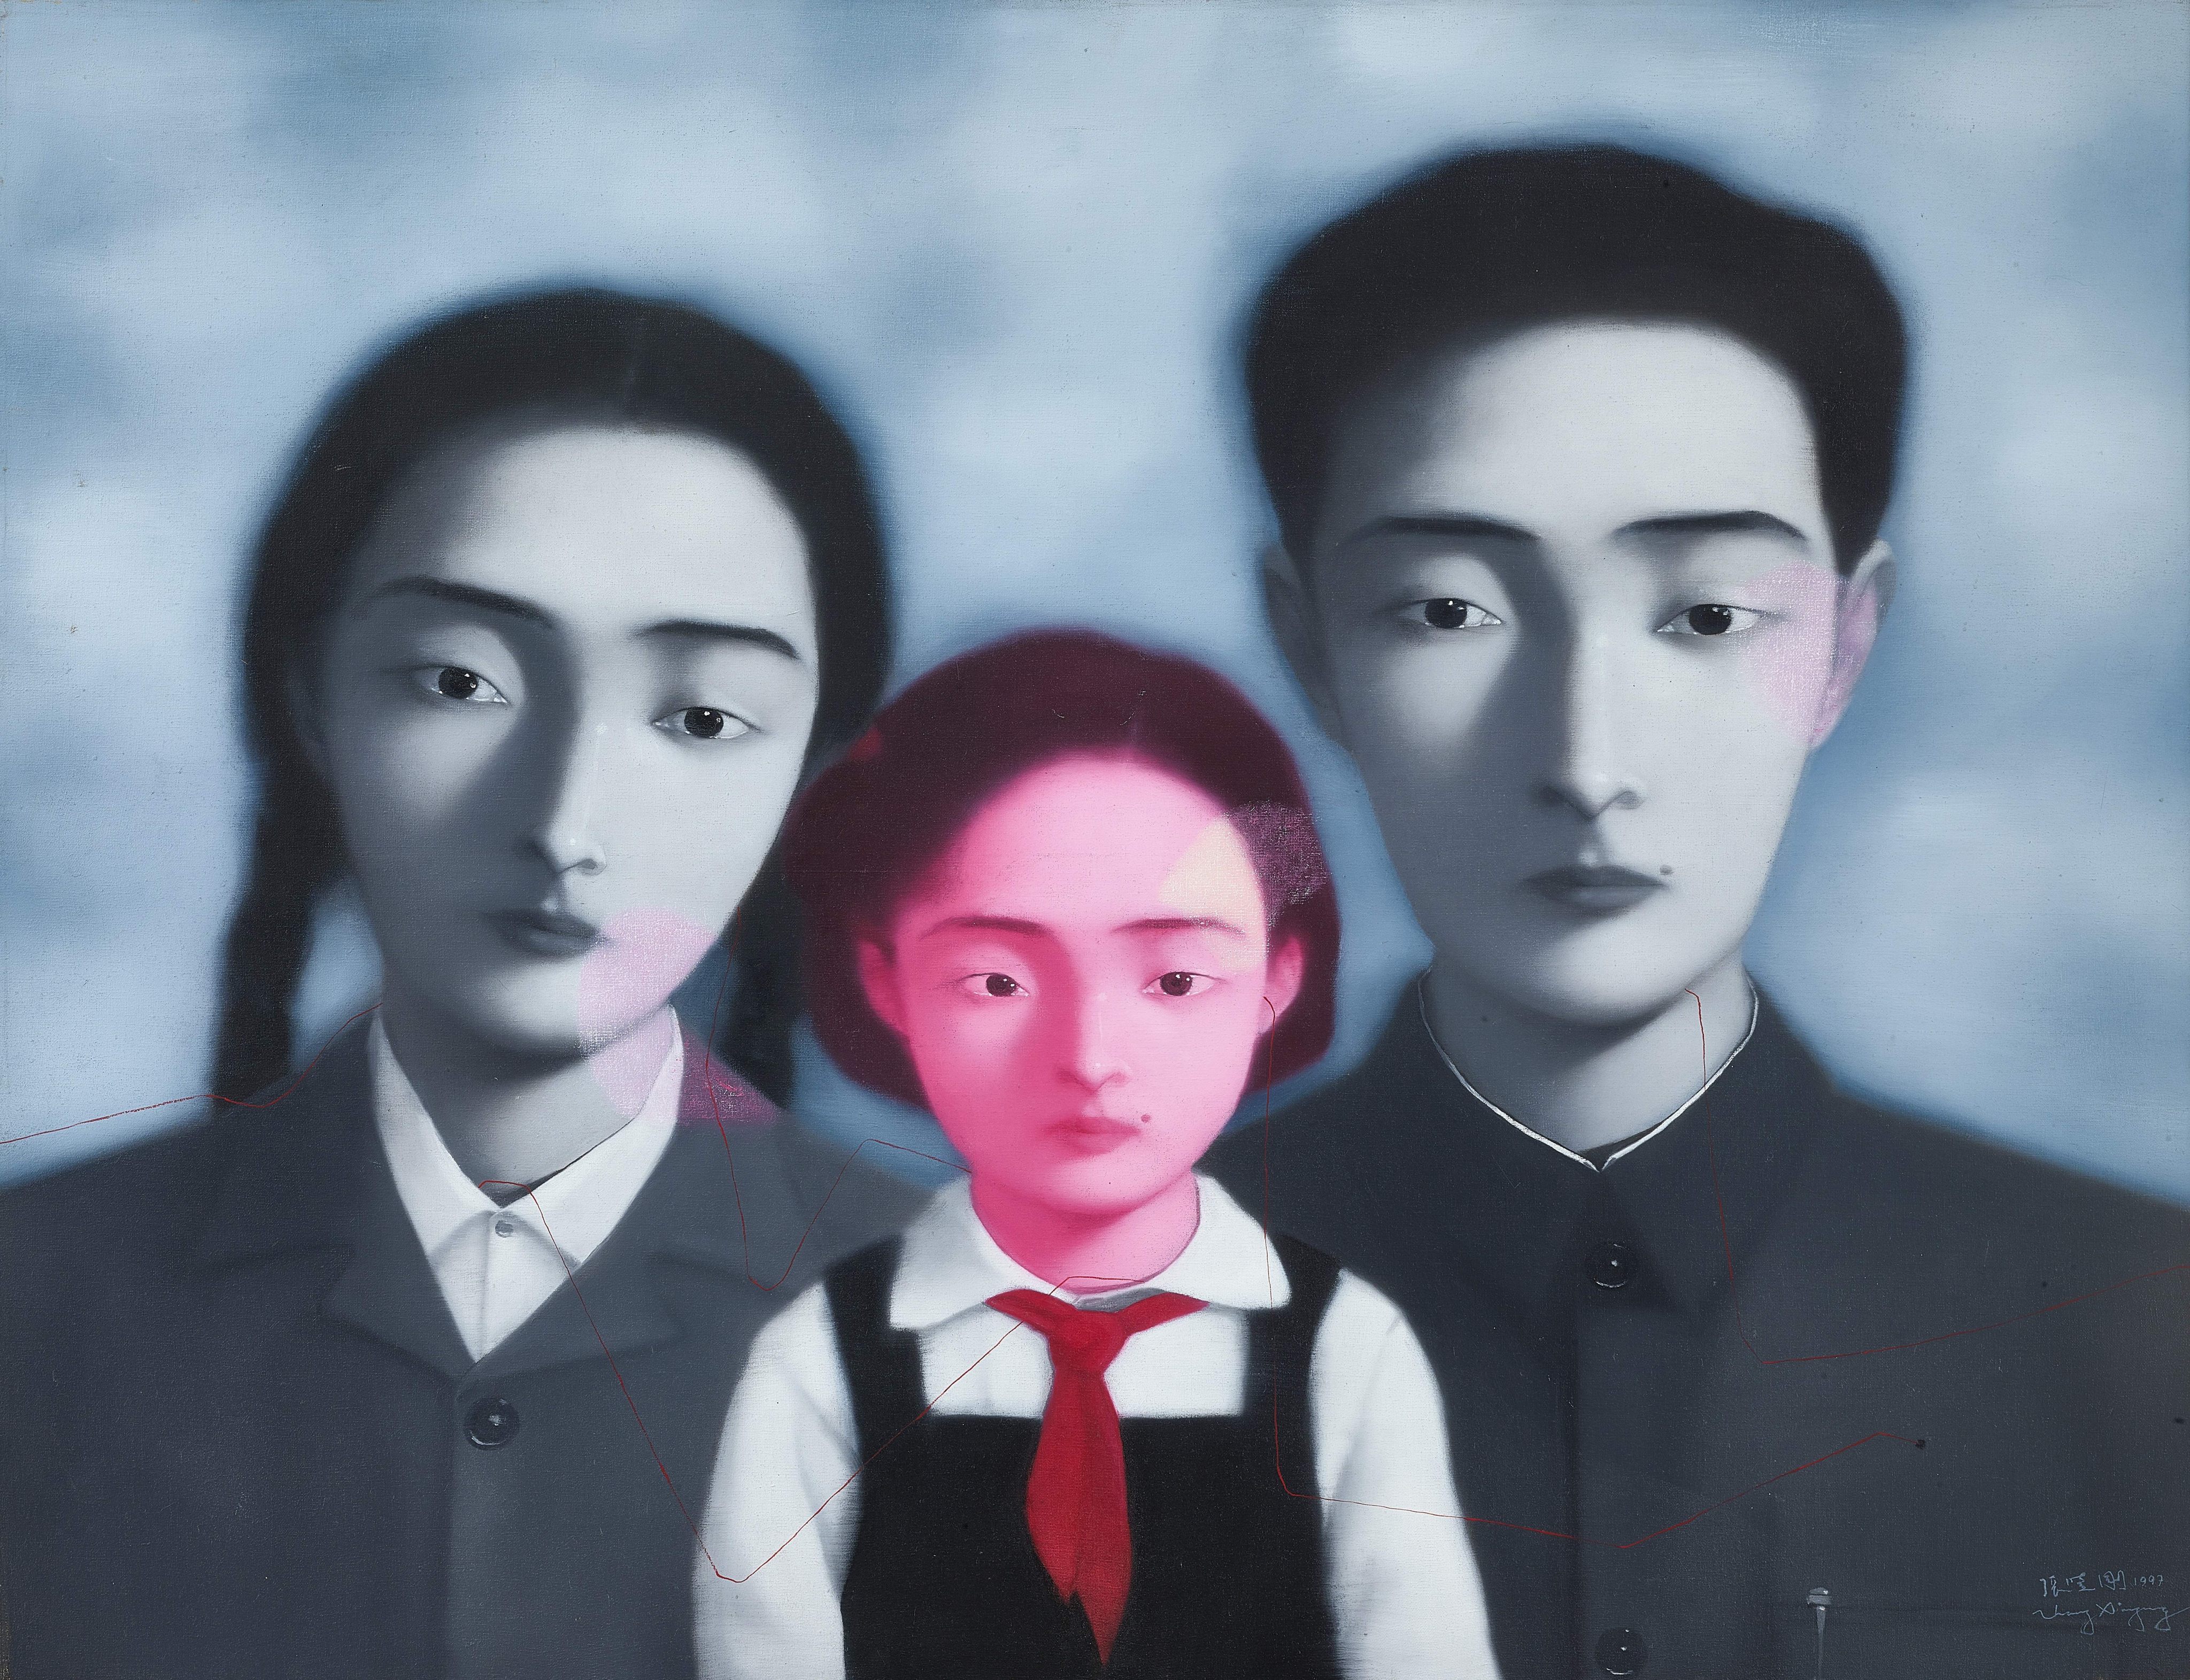 Zhang Xiaogang’s Bloodline - The Big Family No.1 1997, sold by Sotheby’s Hong Kong in 2021. Photo: Sotheby’s